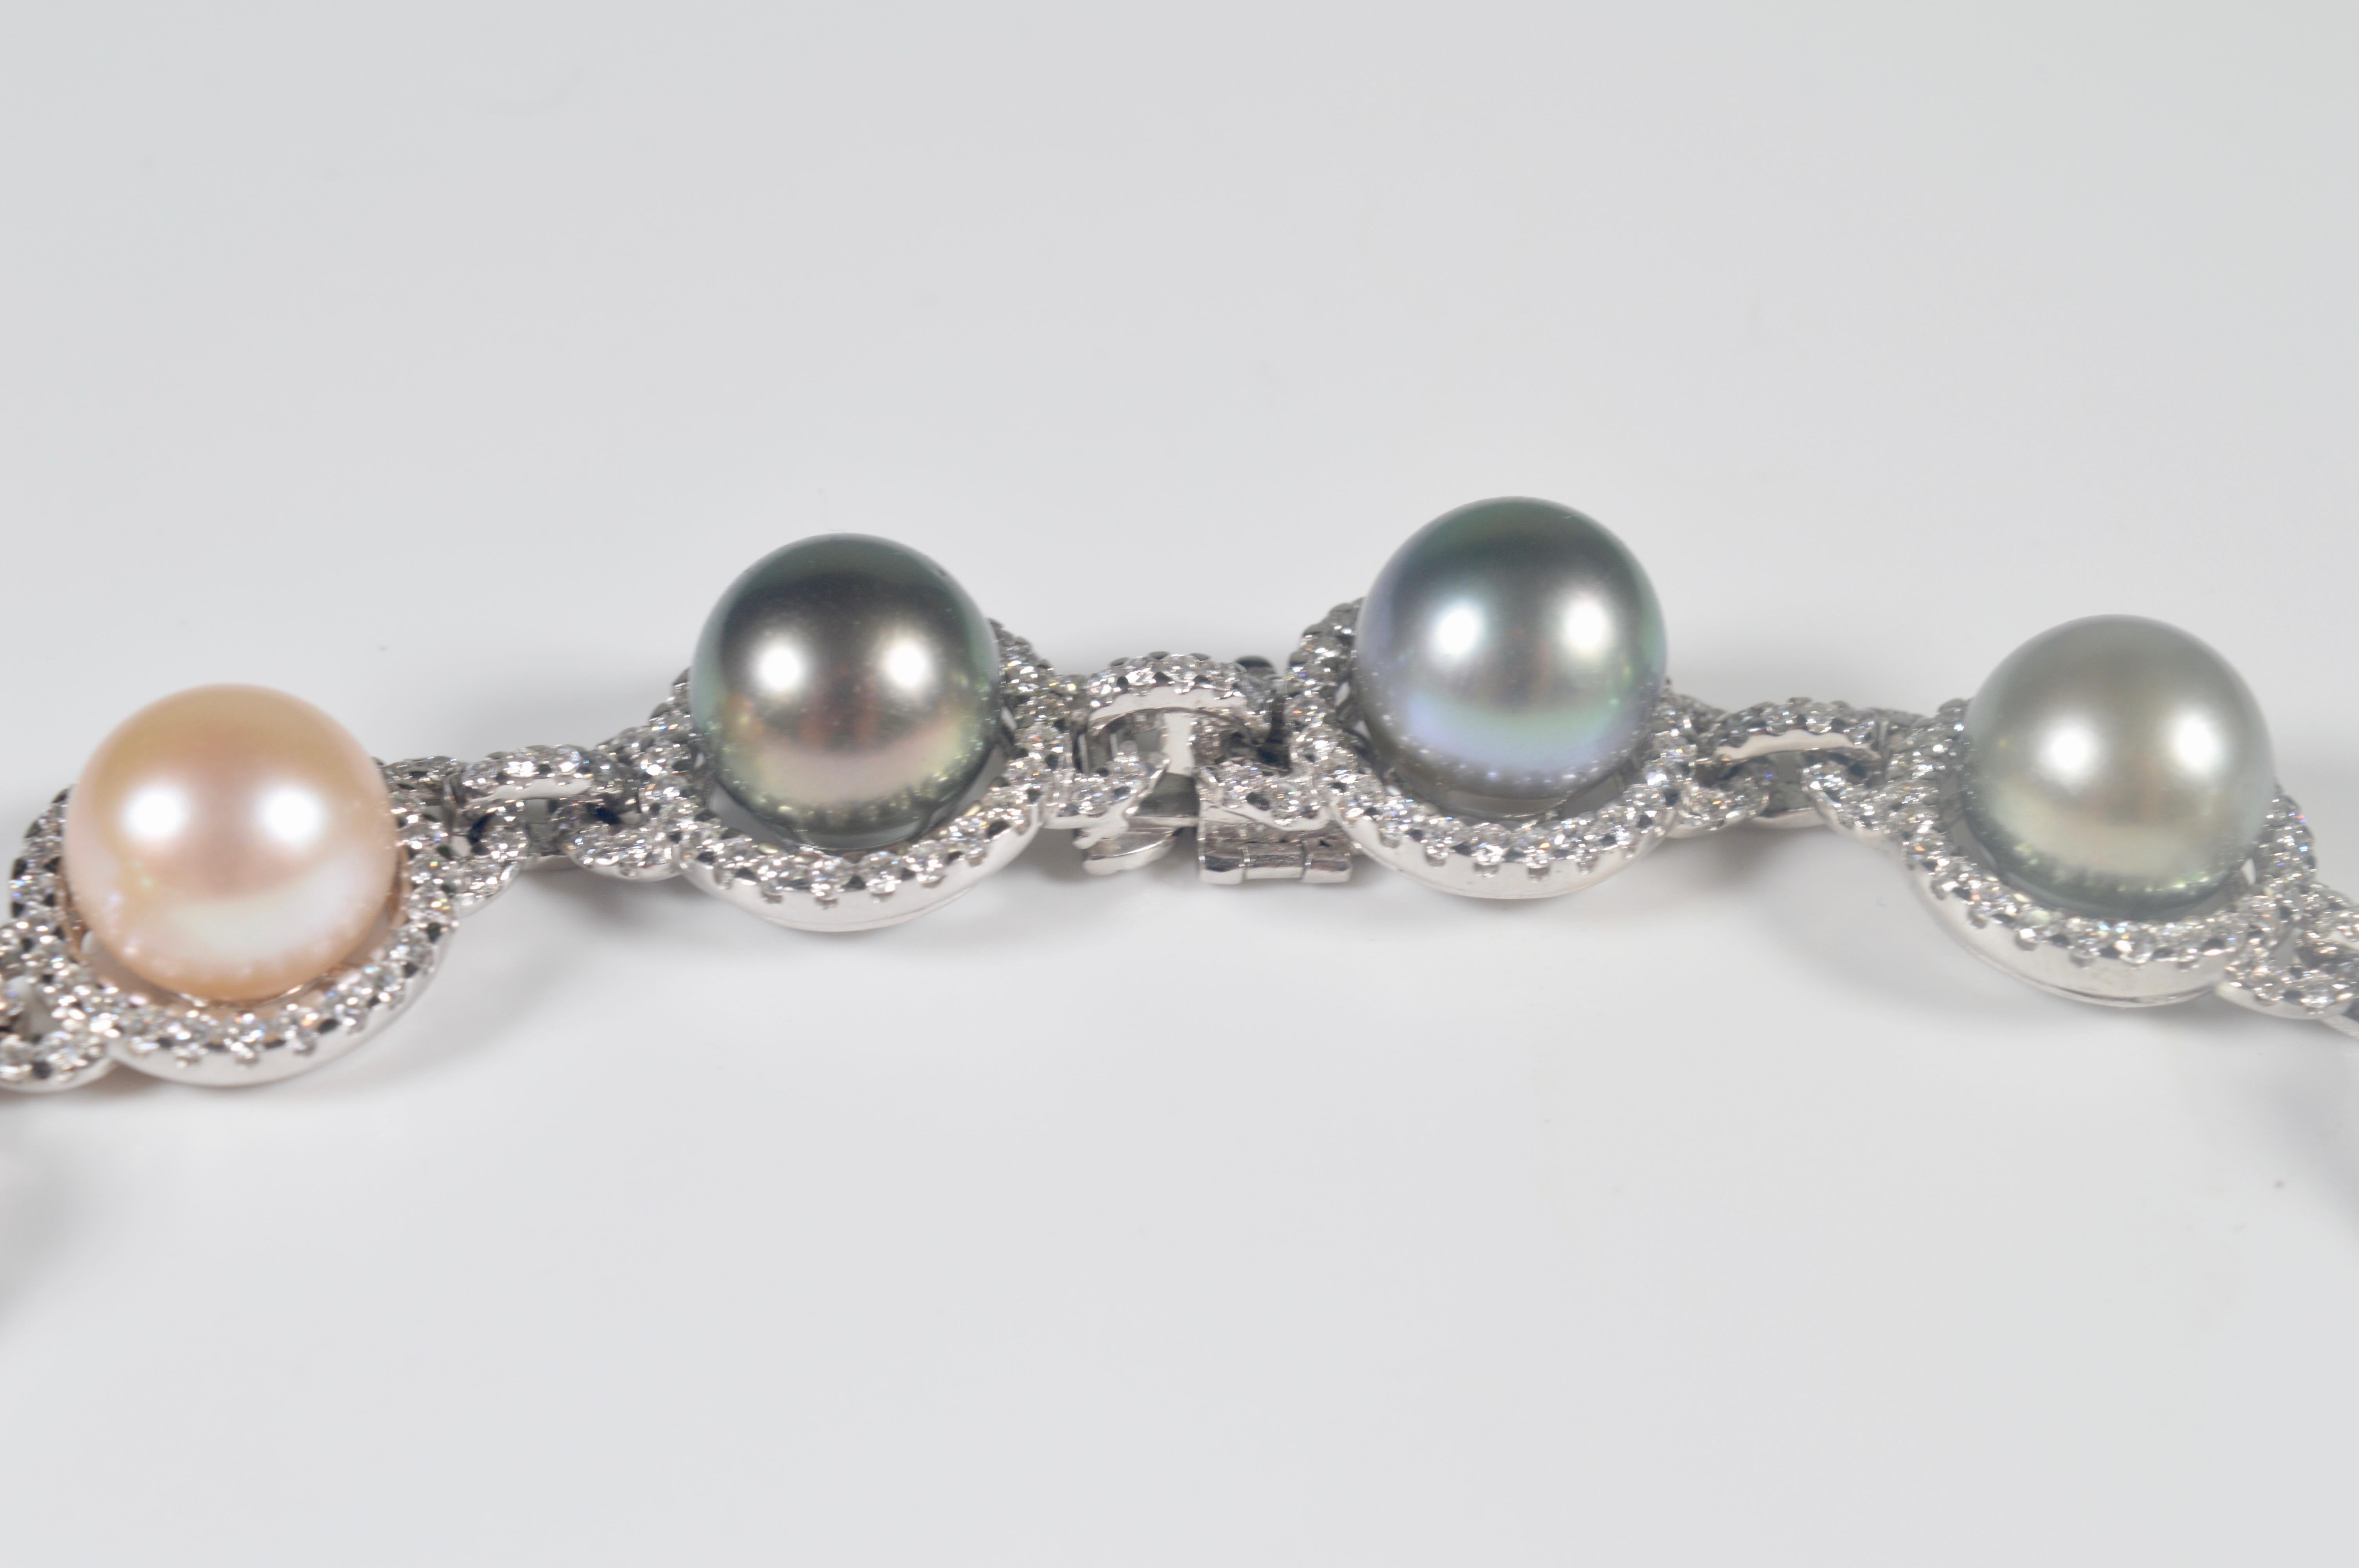 Women's White Gold, South Sea Pearl, Tahitian Pearl and Diamond Necklace 9.53 Carat